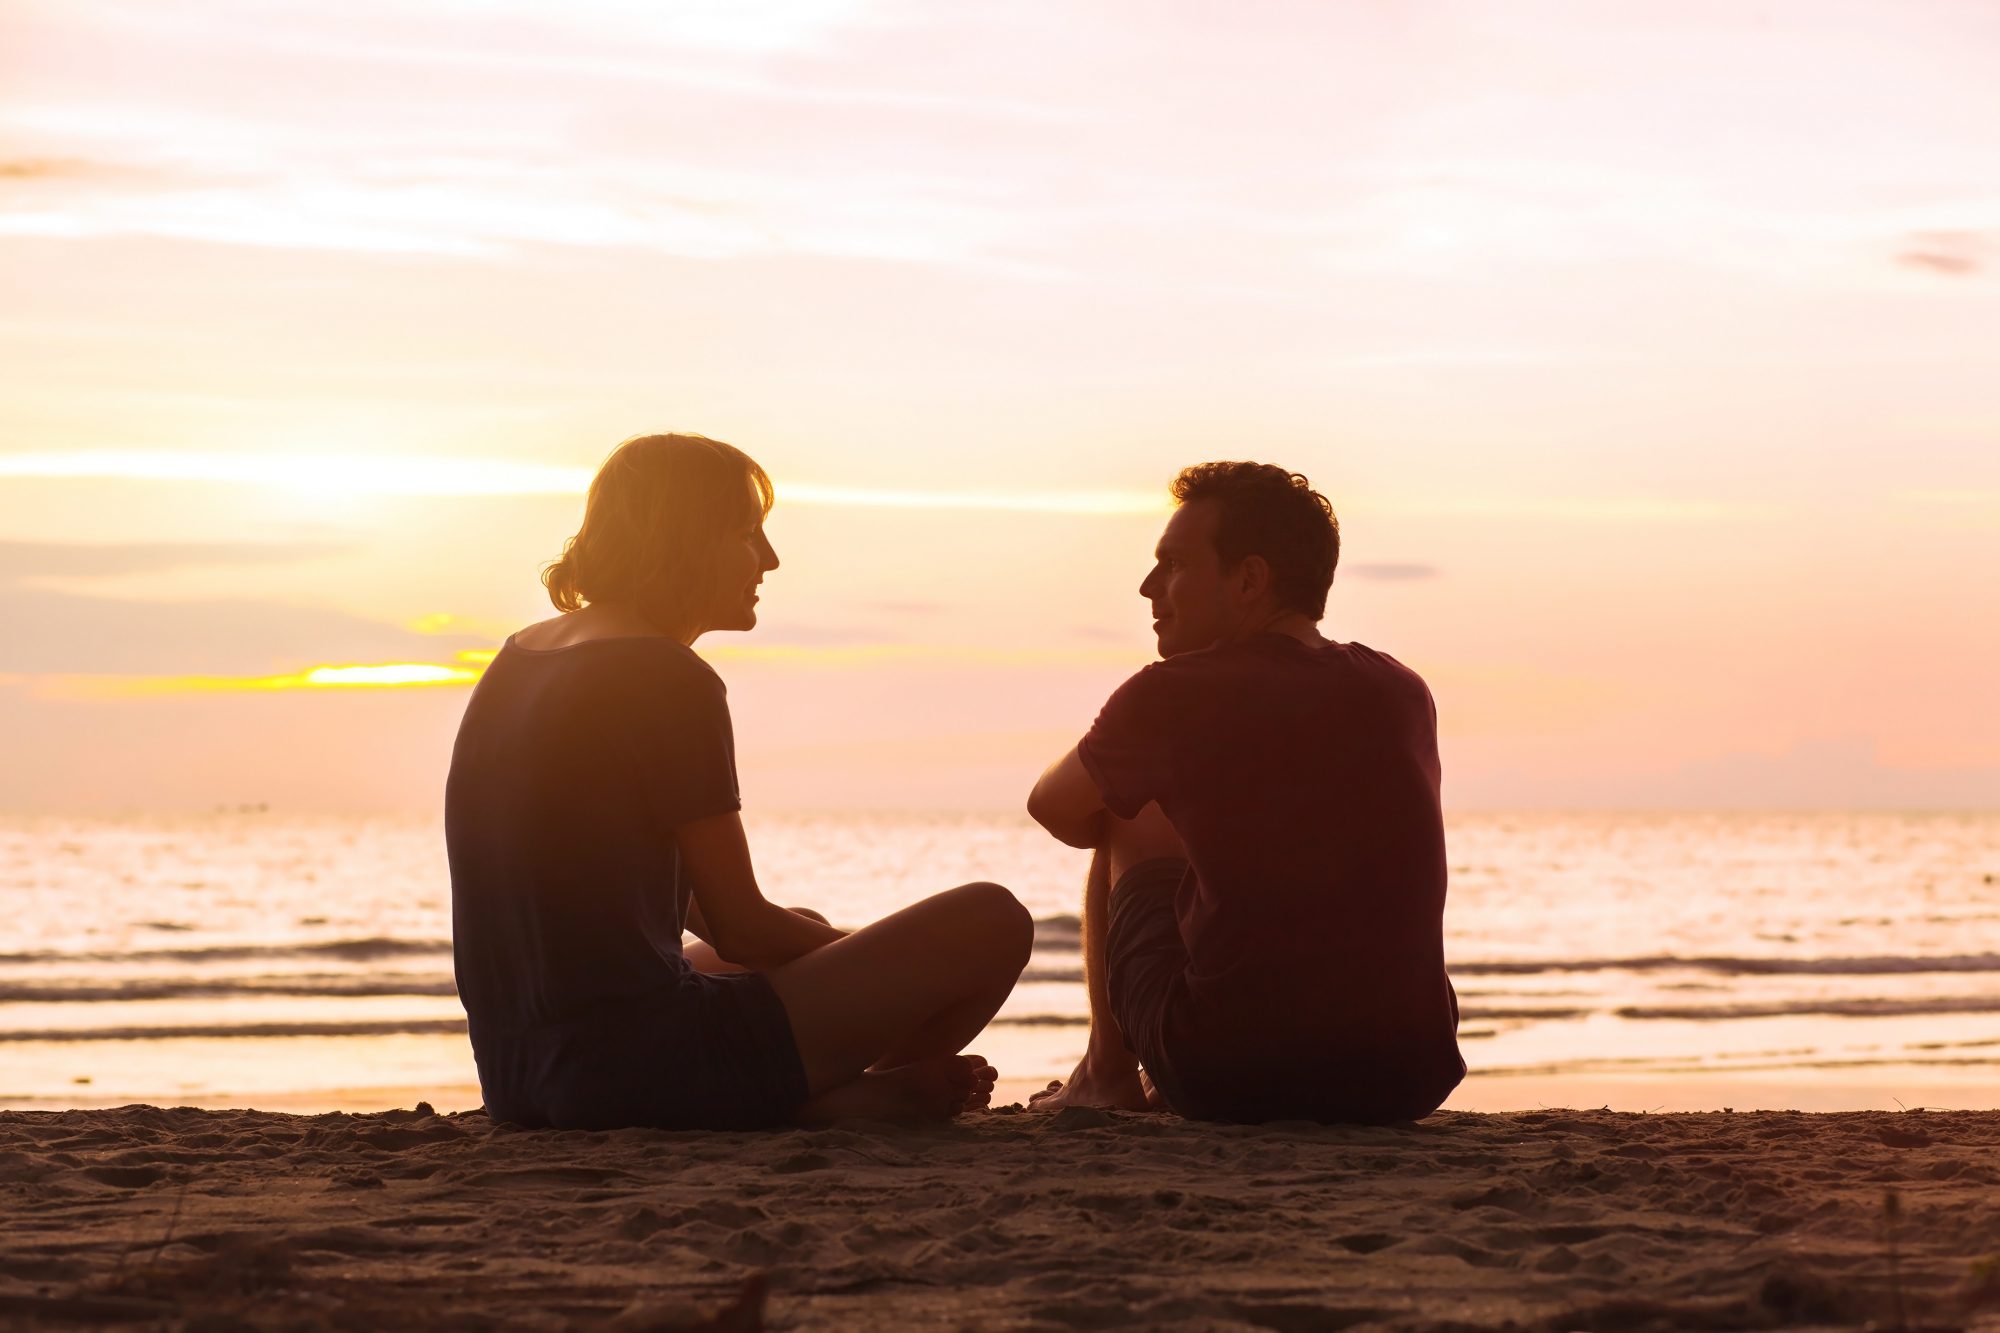 man and woman on the beach at sunset, young couple talking near the sea, dating or friendship concept